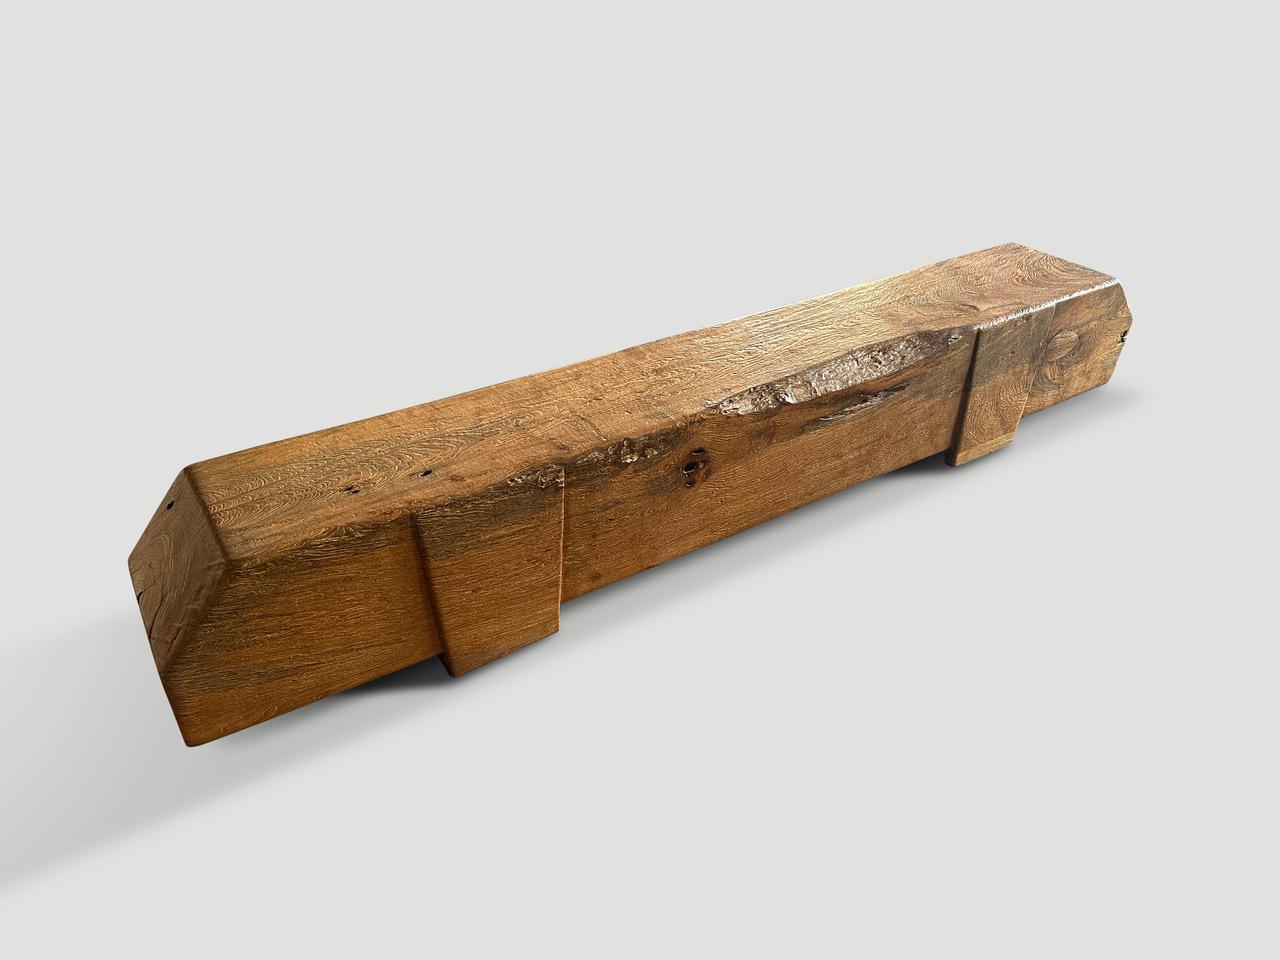 Impressive reclaimed ancient teak log bench. The log is fourteen inches thick and floats two inches off the floor on minimalist hand carved legs inset into the wood. We added a natural oil revealing the beautiful wood grain and unique erosion. It’s